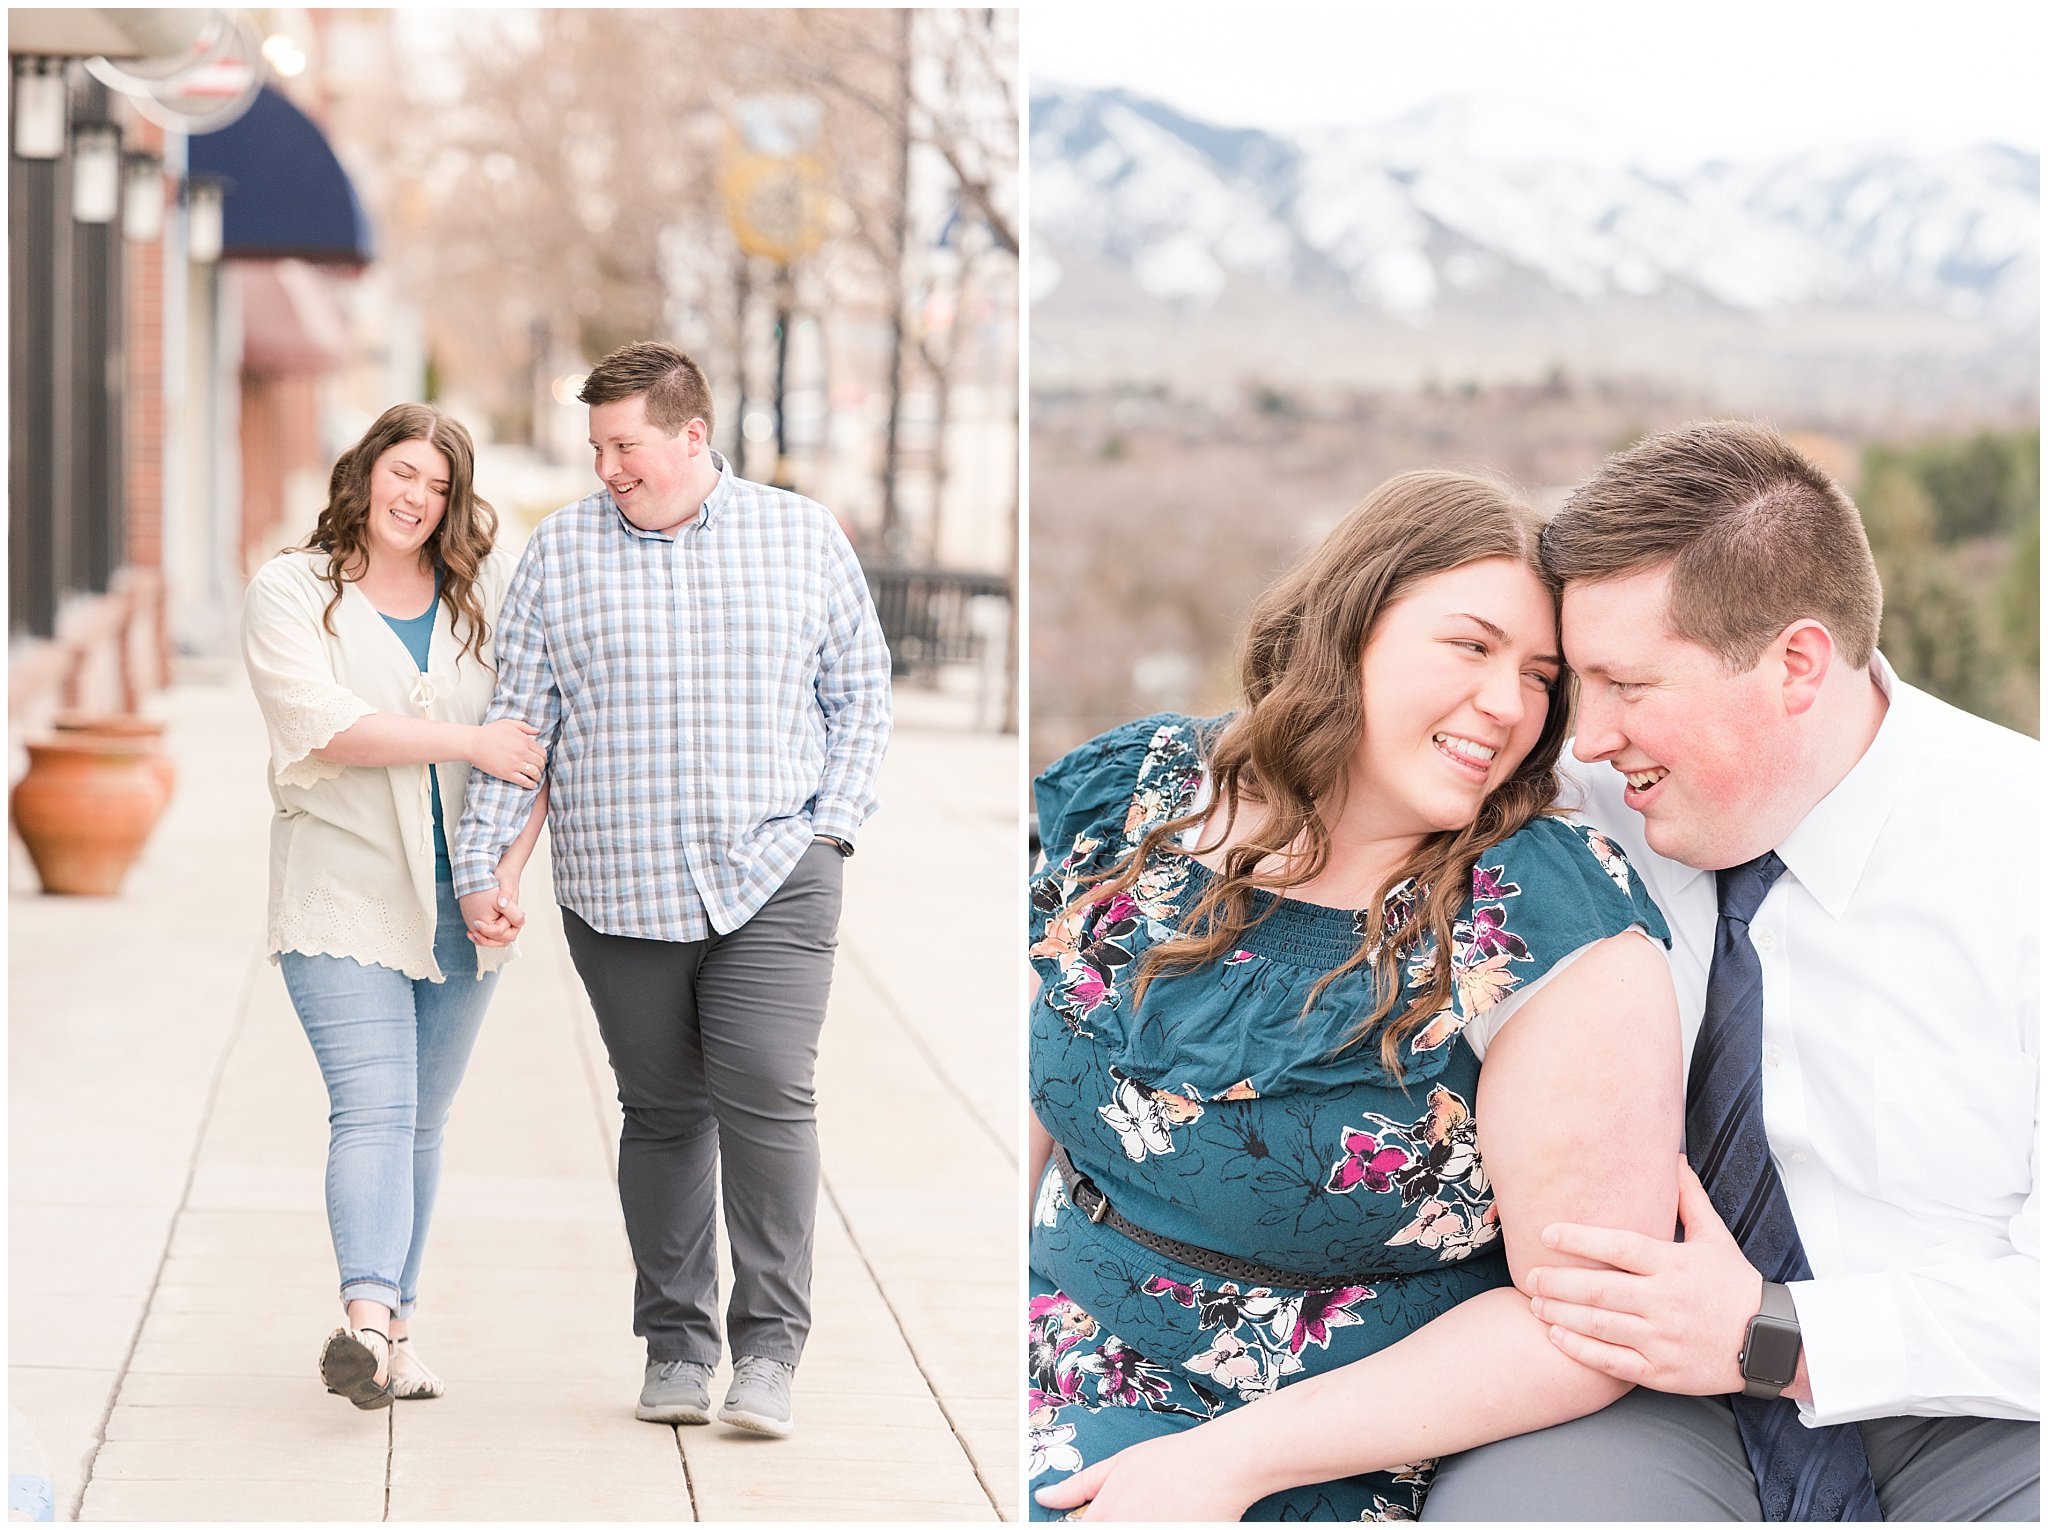 Couple in downtown Logan Utah for engagement session | Top Utah Wedding and Couples Photos 2019 | Jessie and Dallin Photography